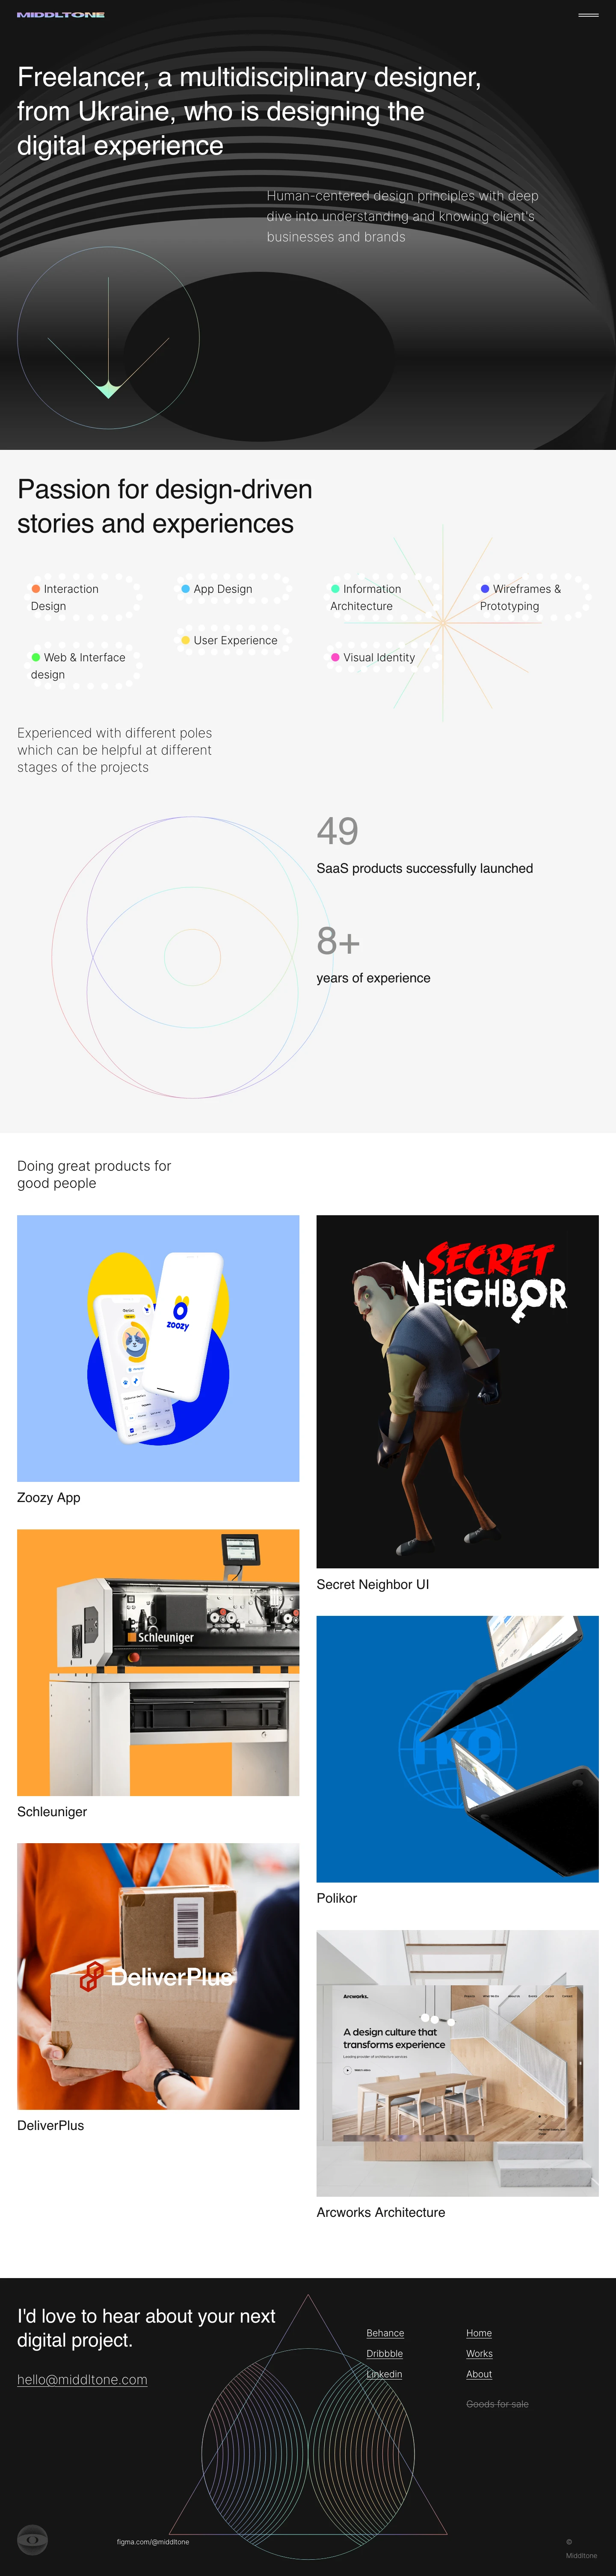 Middltone Landing Page Example: Freelancer, a multidisciplinary designer, from Ukraine, who is designing the digital experience. Human-centered design principles with deep dive into understanding and knowing client's businesses and brands.